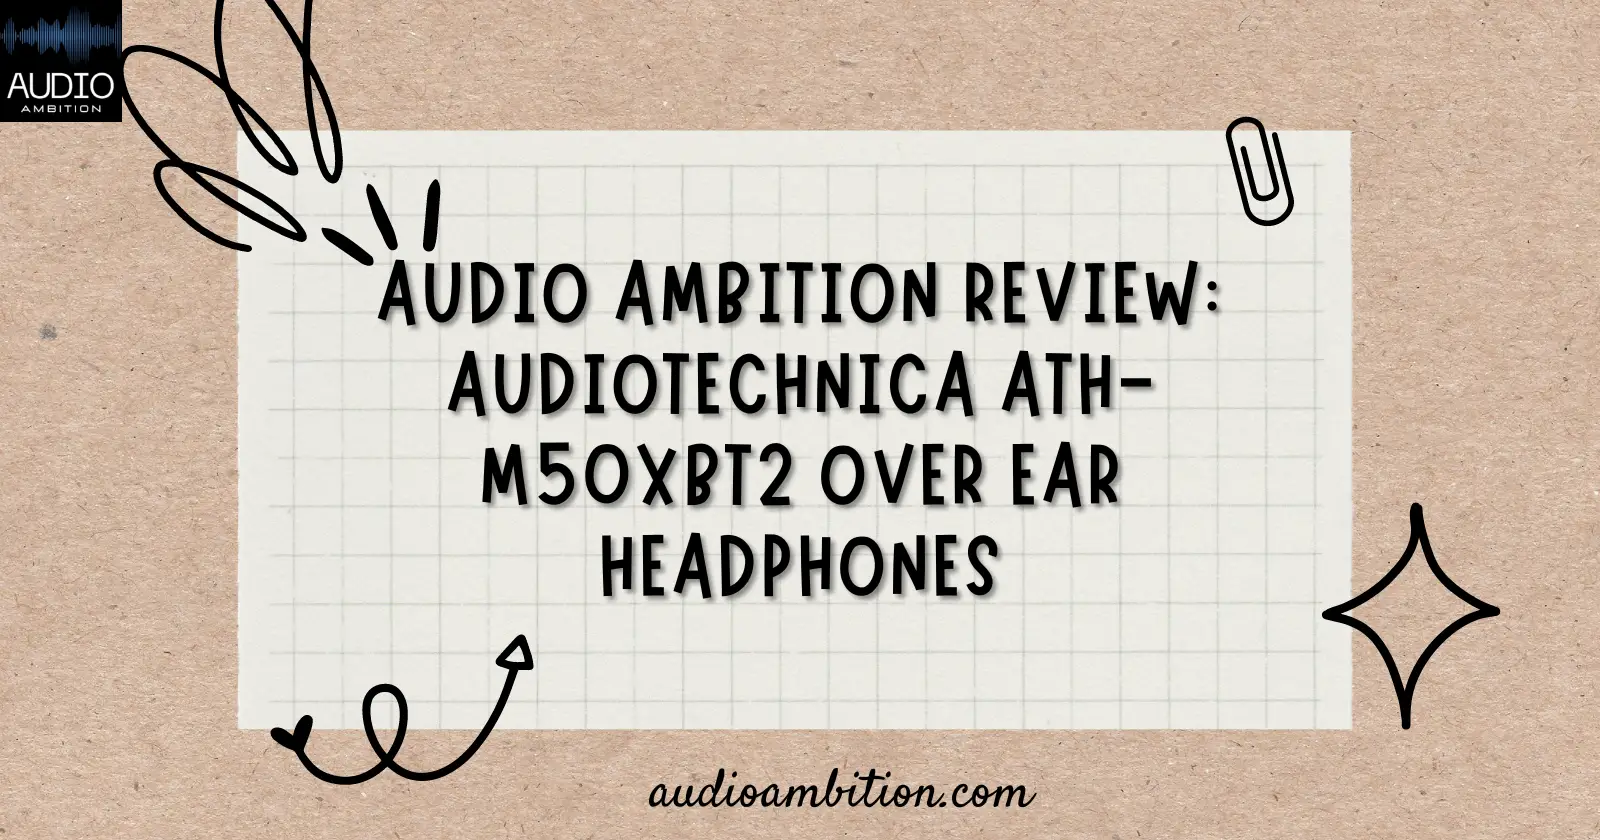 Audio Ambition Review Audiotechnica ATH-M50XBT2 Over Ear Headphones